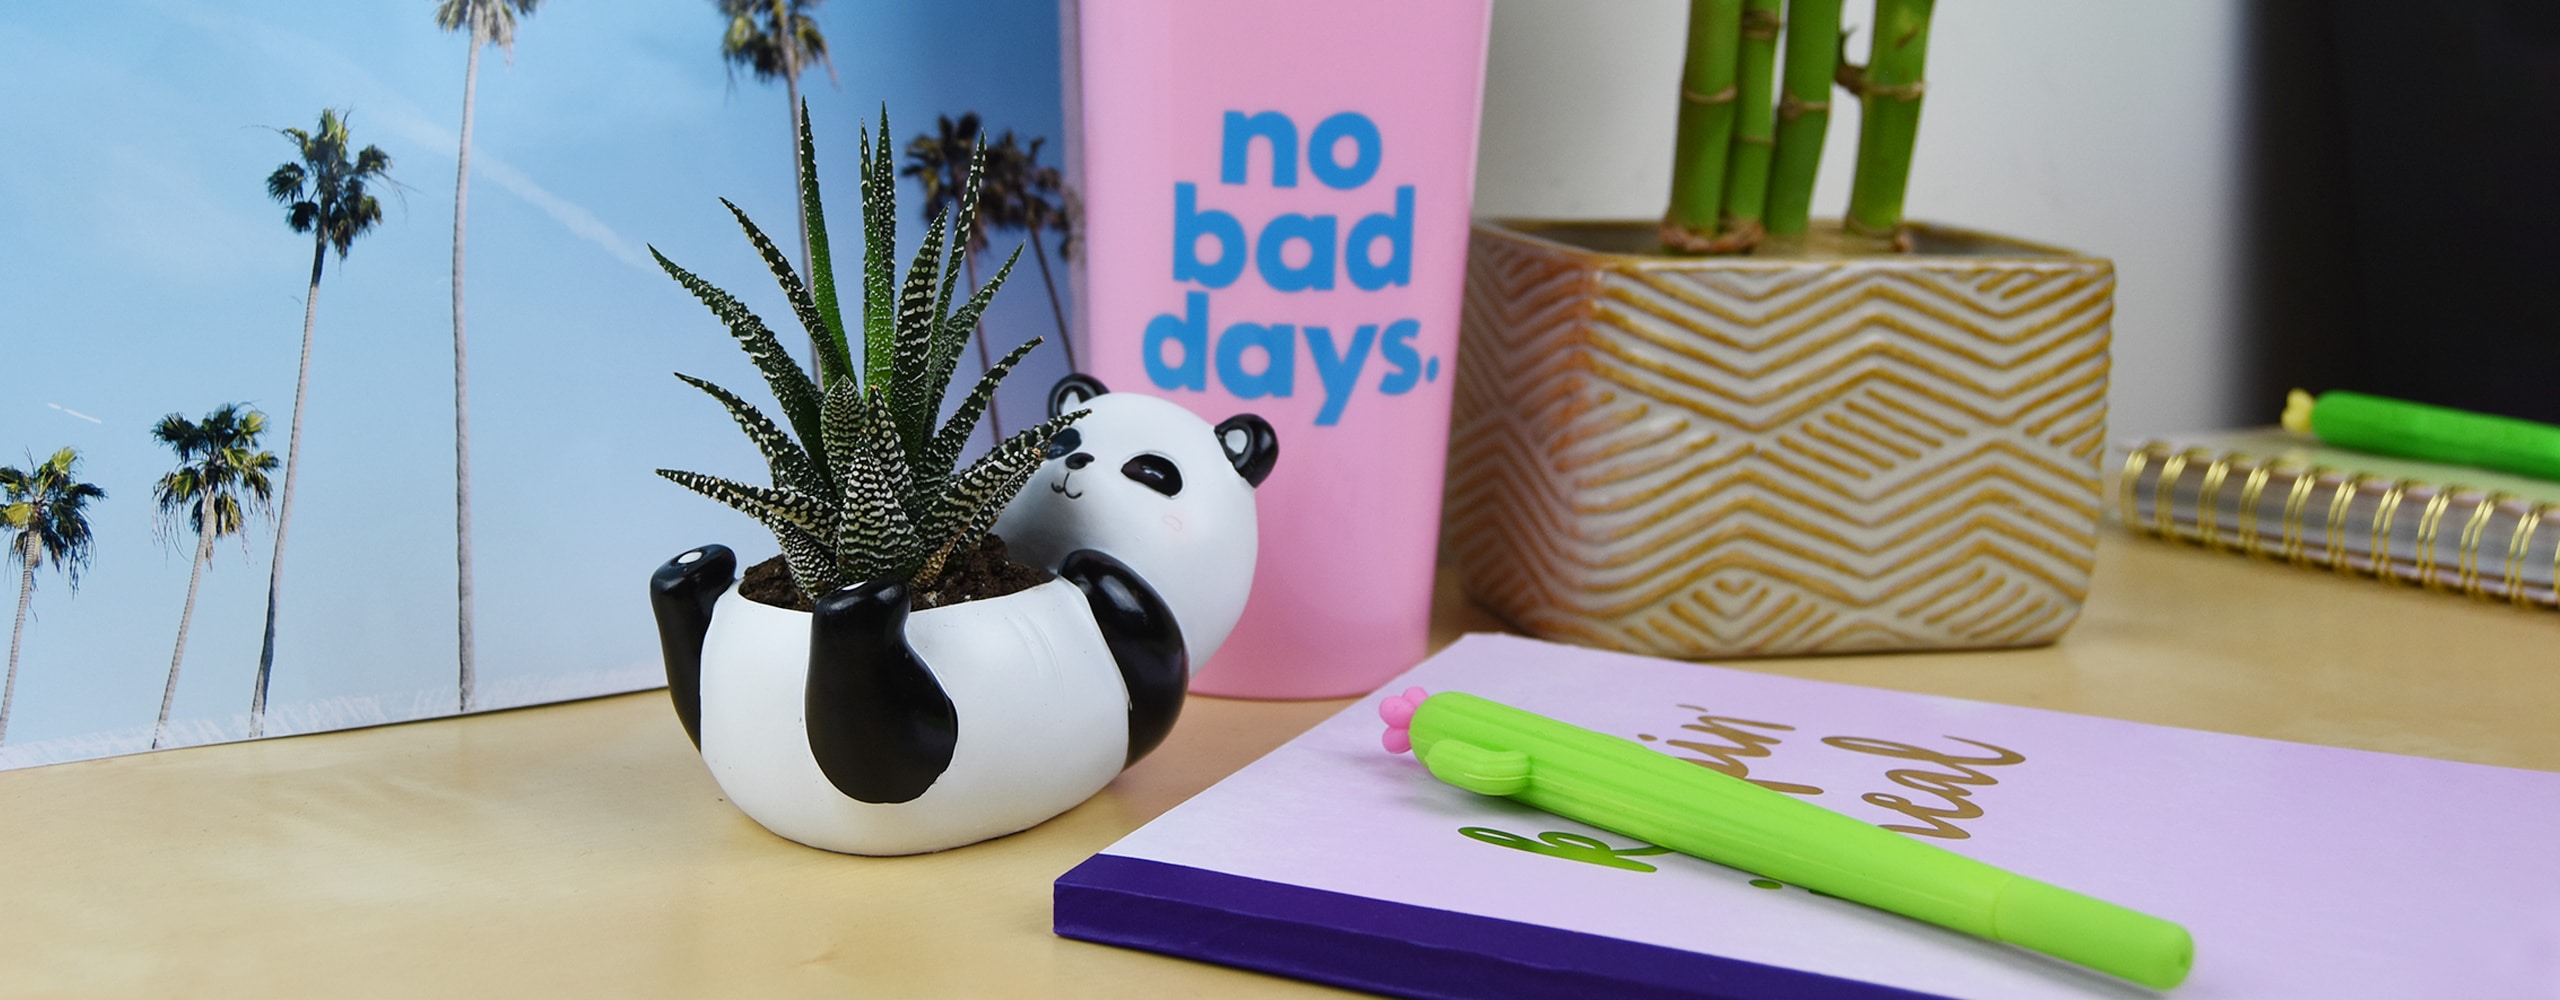 Desk image showcasing a range of Amazon Teen products including a panda shaped planter, coffee mug, notebook and pen.